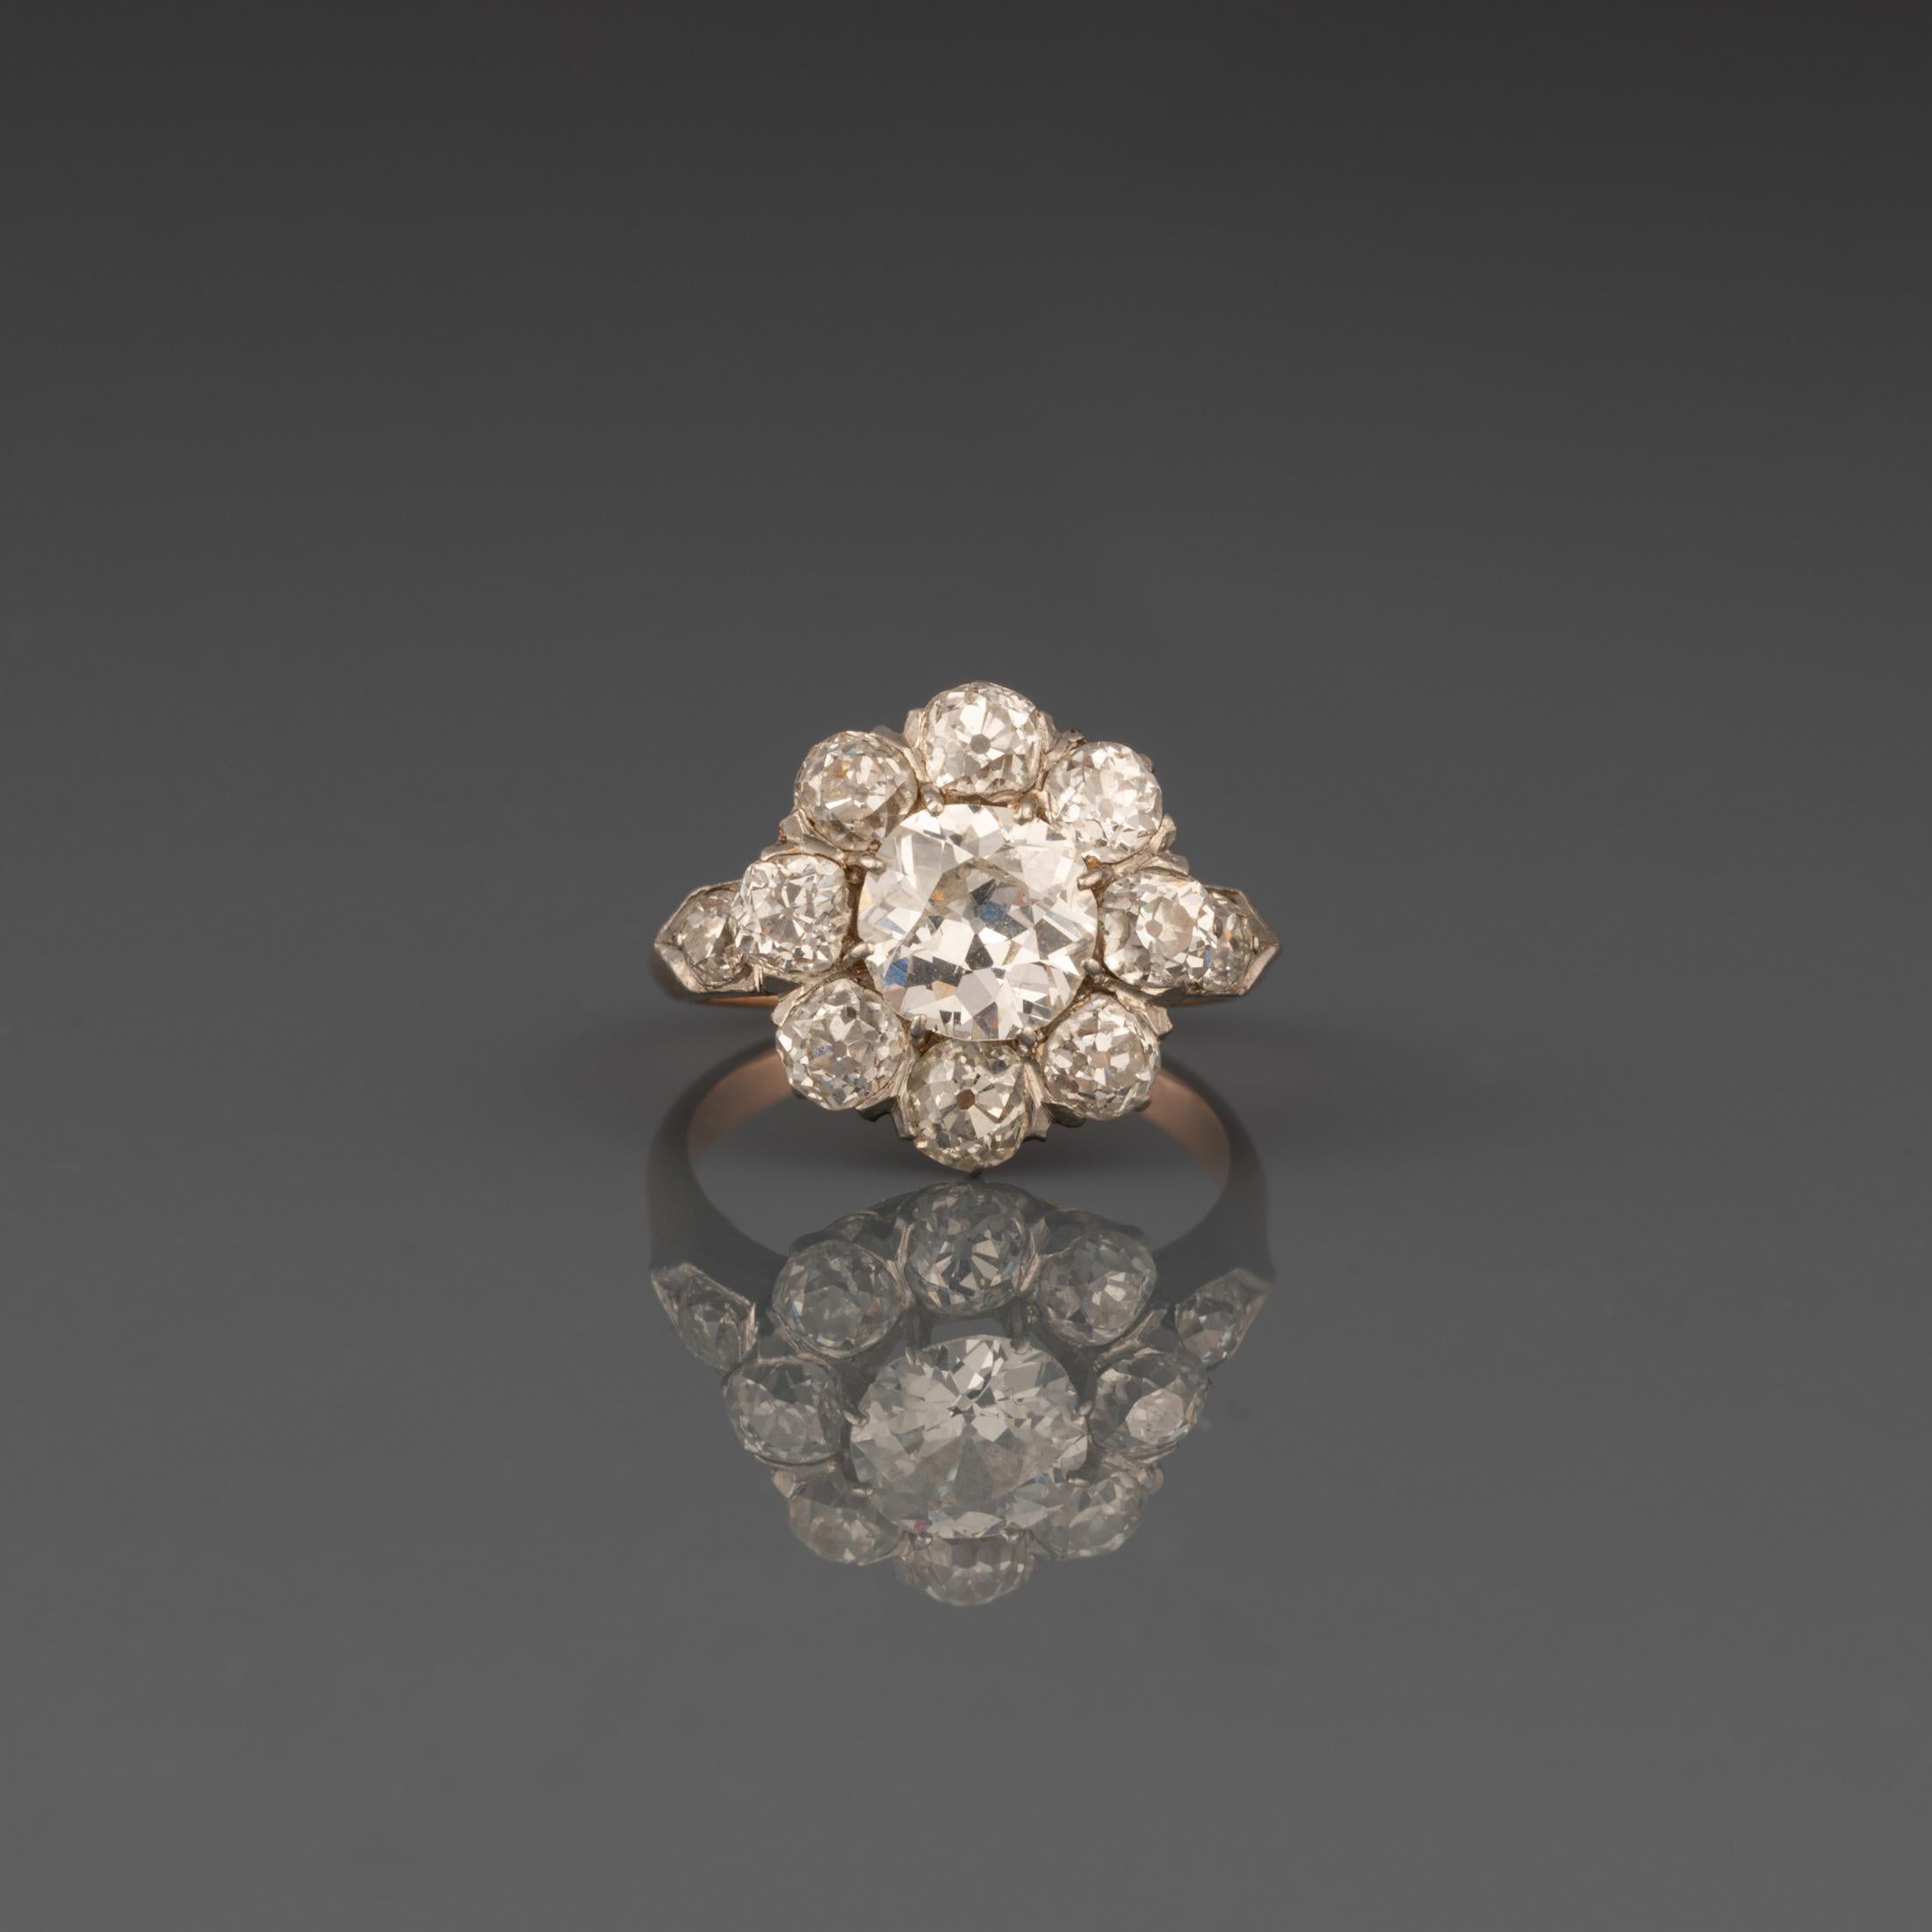 A very beautiful antique, with an history. The ring stayed in the same family since the 1860's. 

The ring is made in rose and white gold 18K. The diamonds weights 2.80/3 Carats total approximately: 1.20fort the central plus 0.20/0.25*8. They are